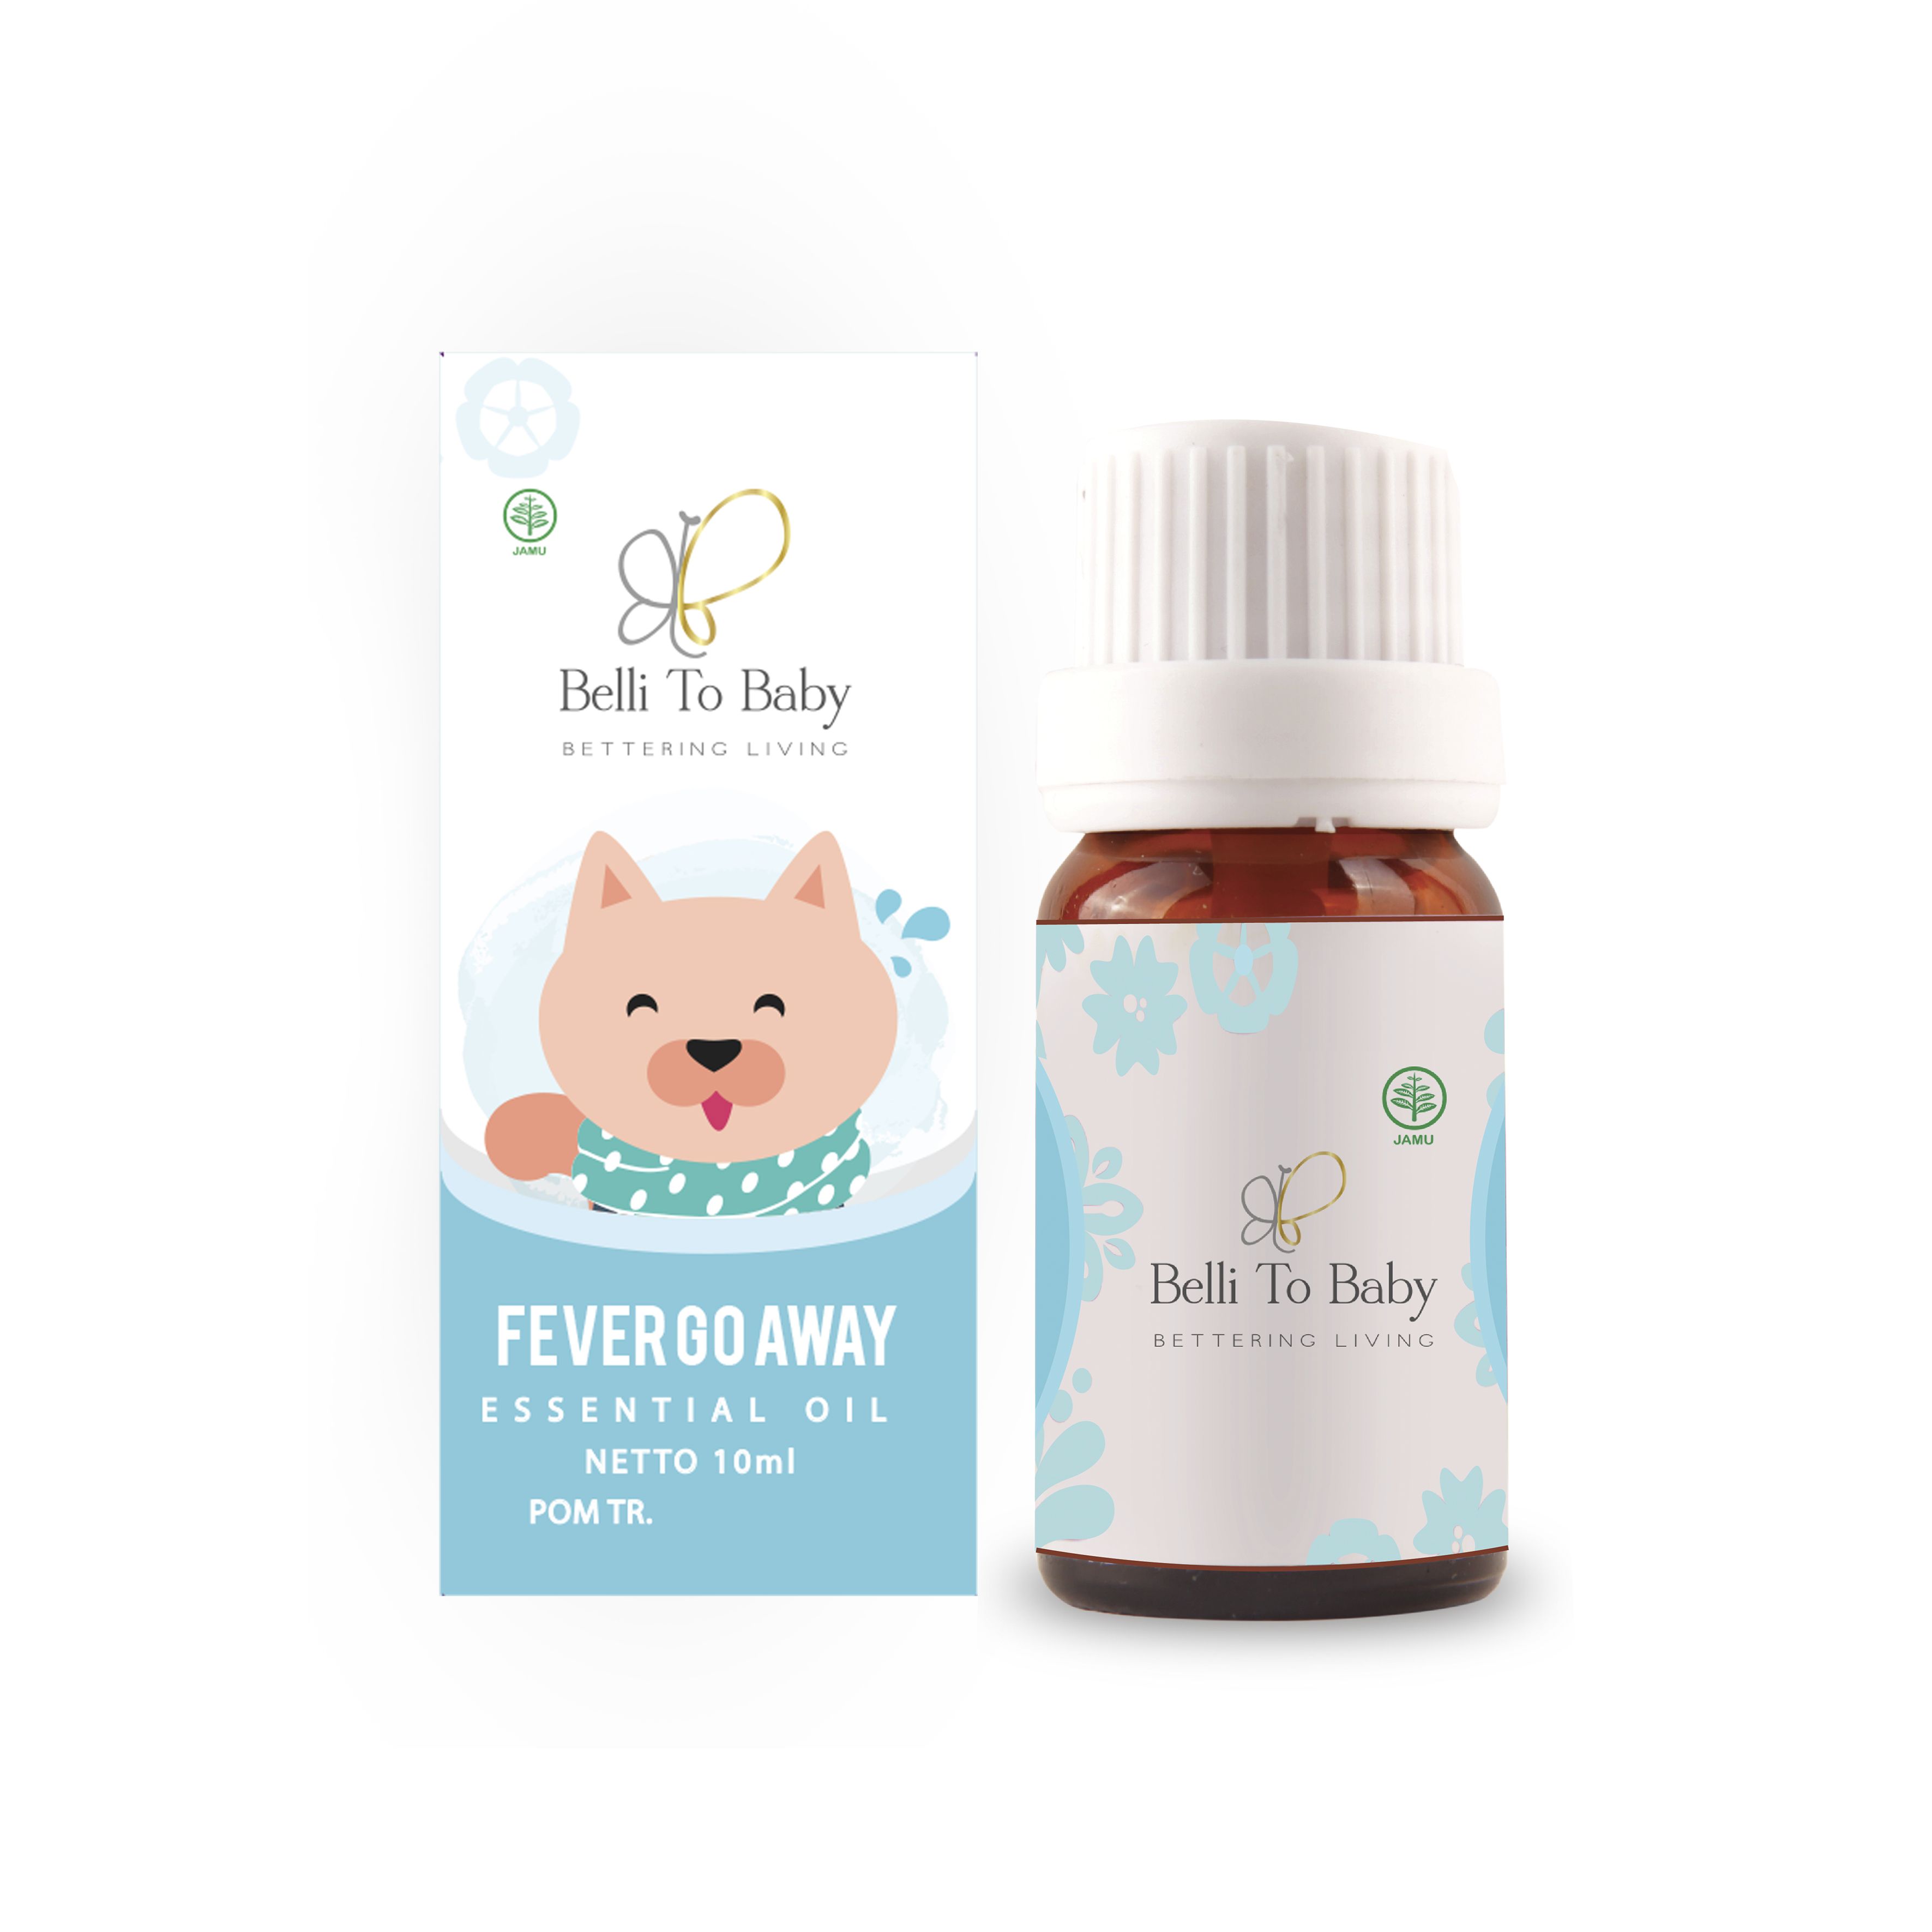 Belli To Baby Essential Oil Fever Go Away 10ml - 2